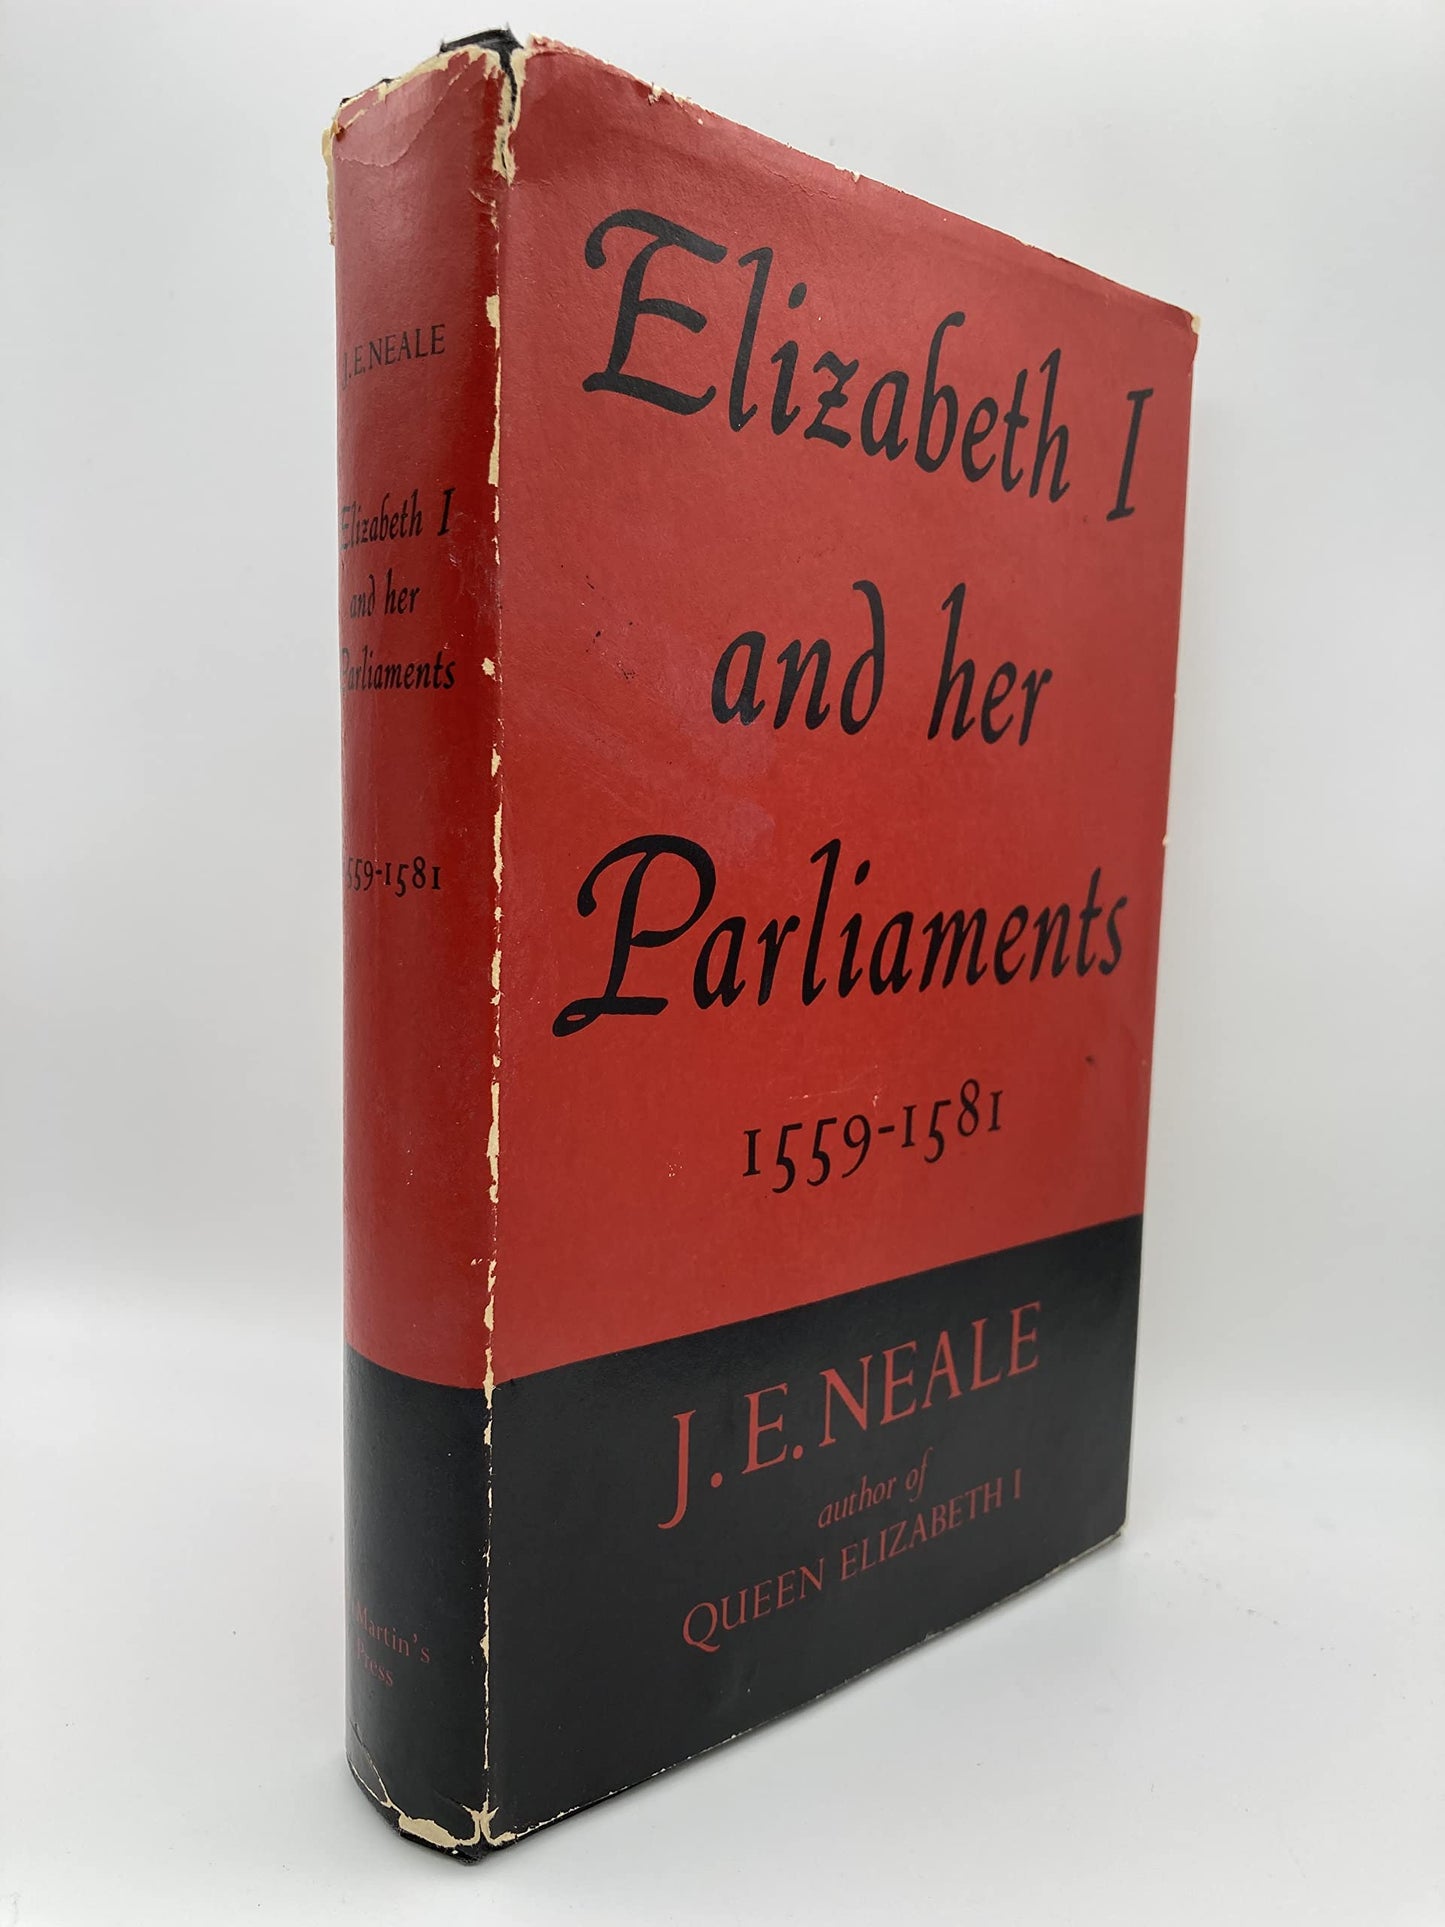 Elizabeth I and Her Parliaments, 1559-1601